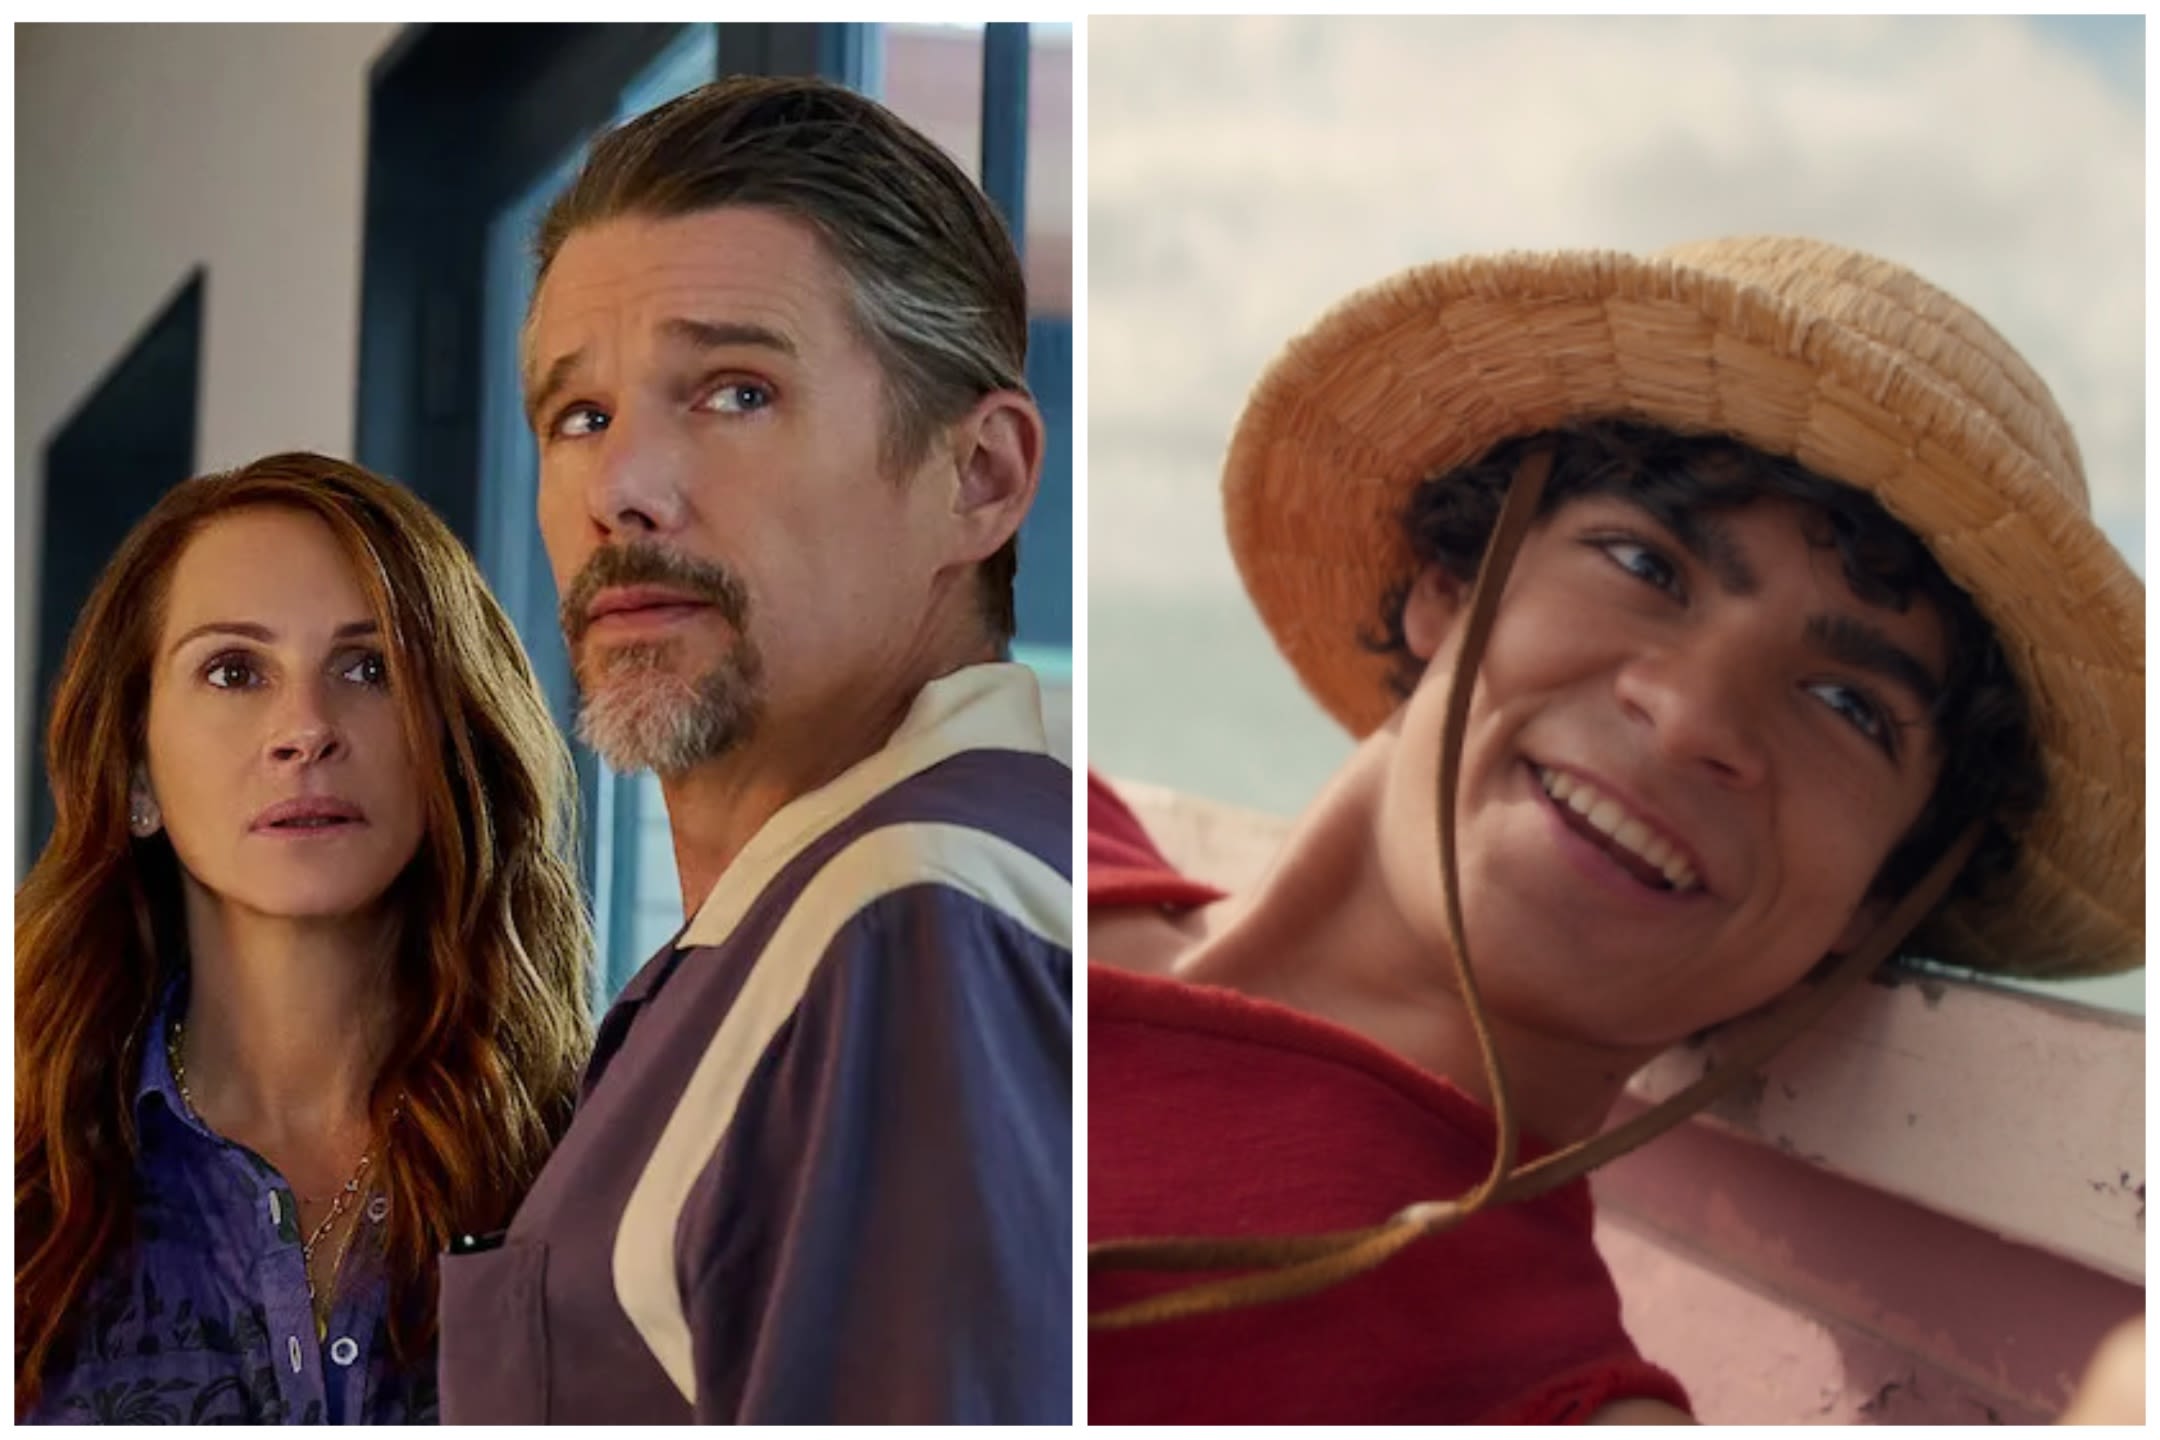 ... All Netflix Viewing for Second Half of 2023 With 121 Million Views, ‘One Piece’ Leads TV With 71.6 Million Views